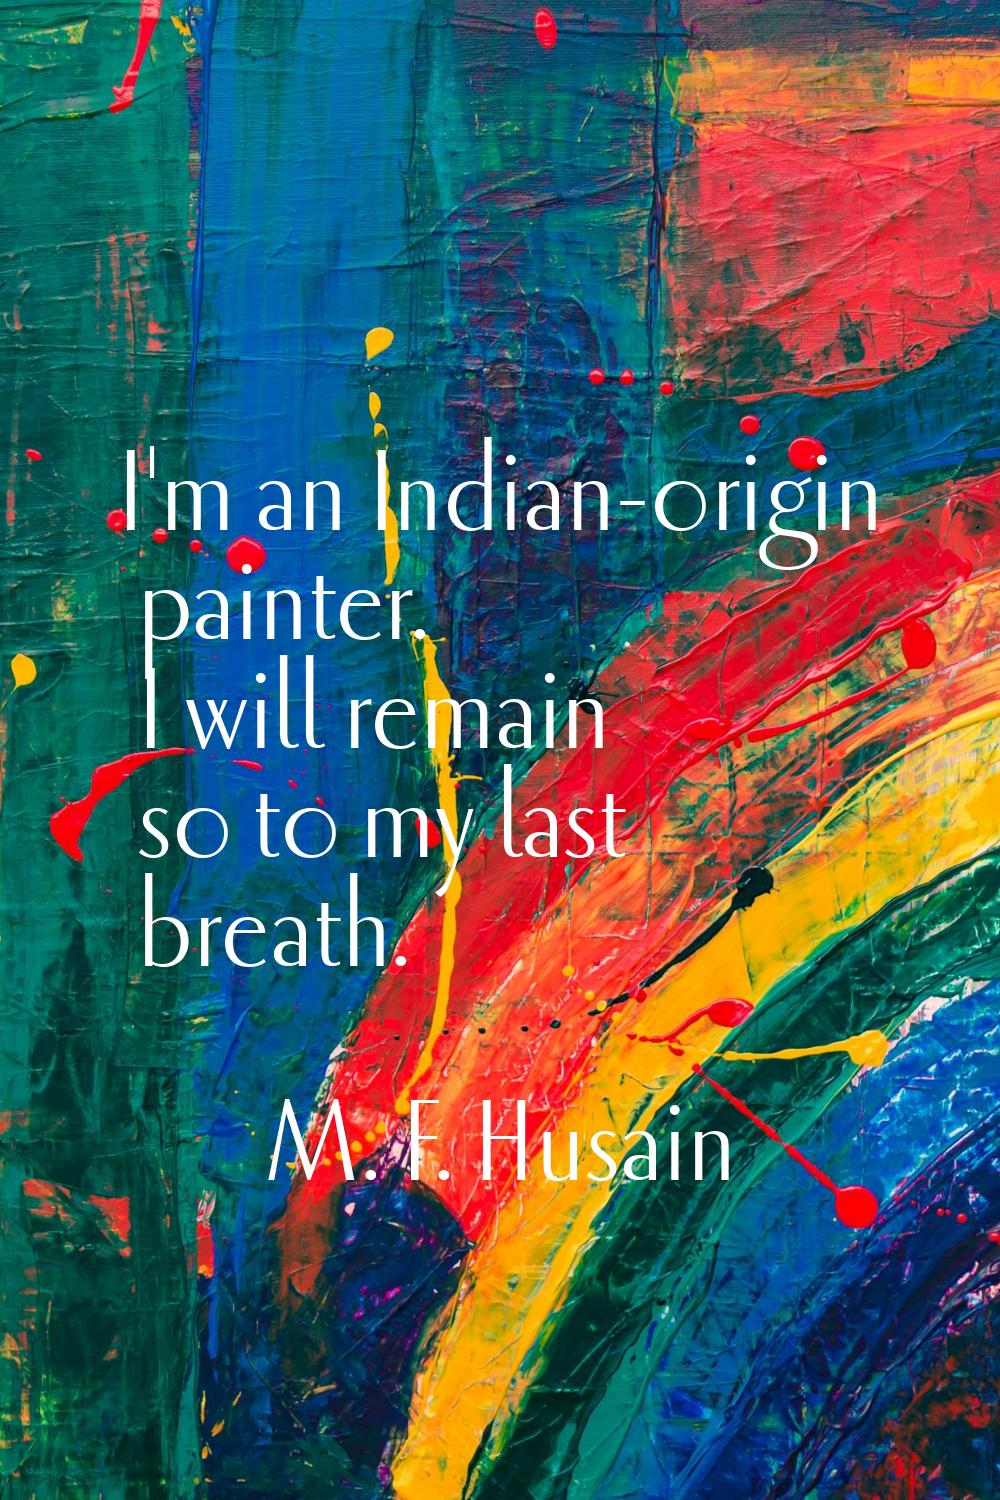 I'm an Indian-origin painter. I will remain so to my last breath.